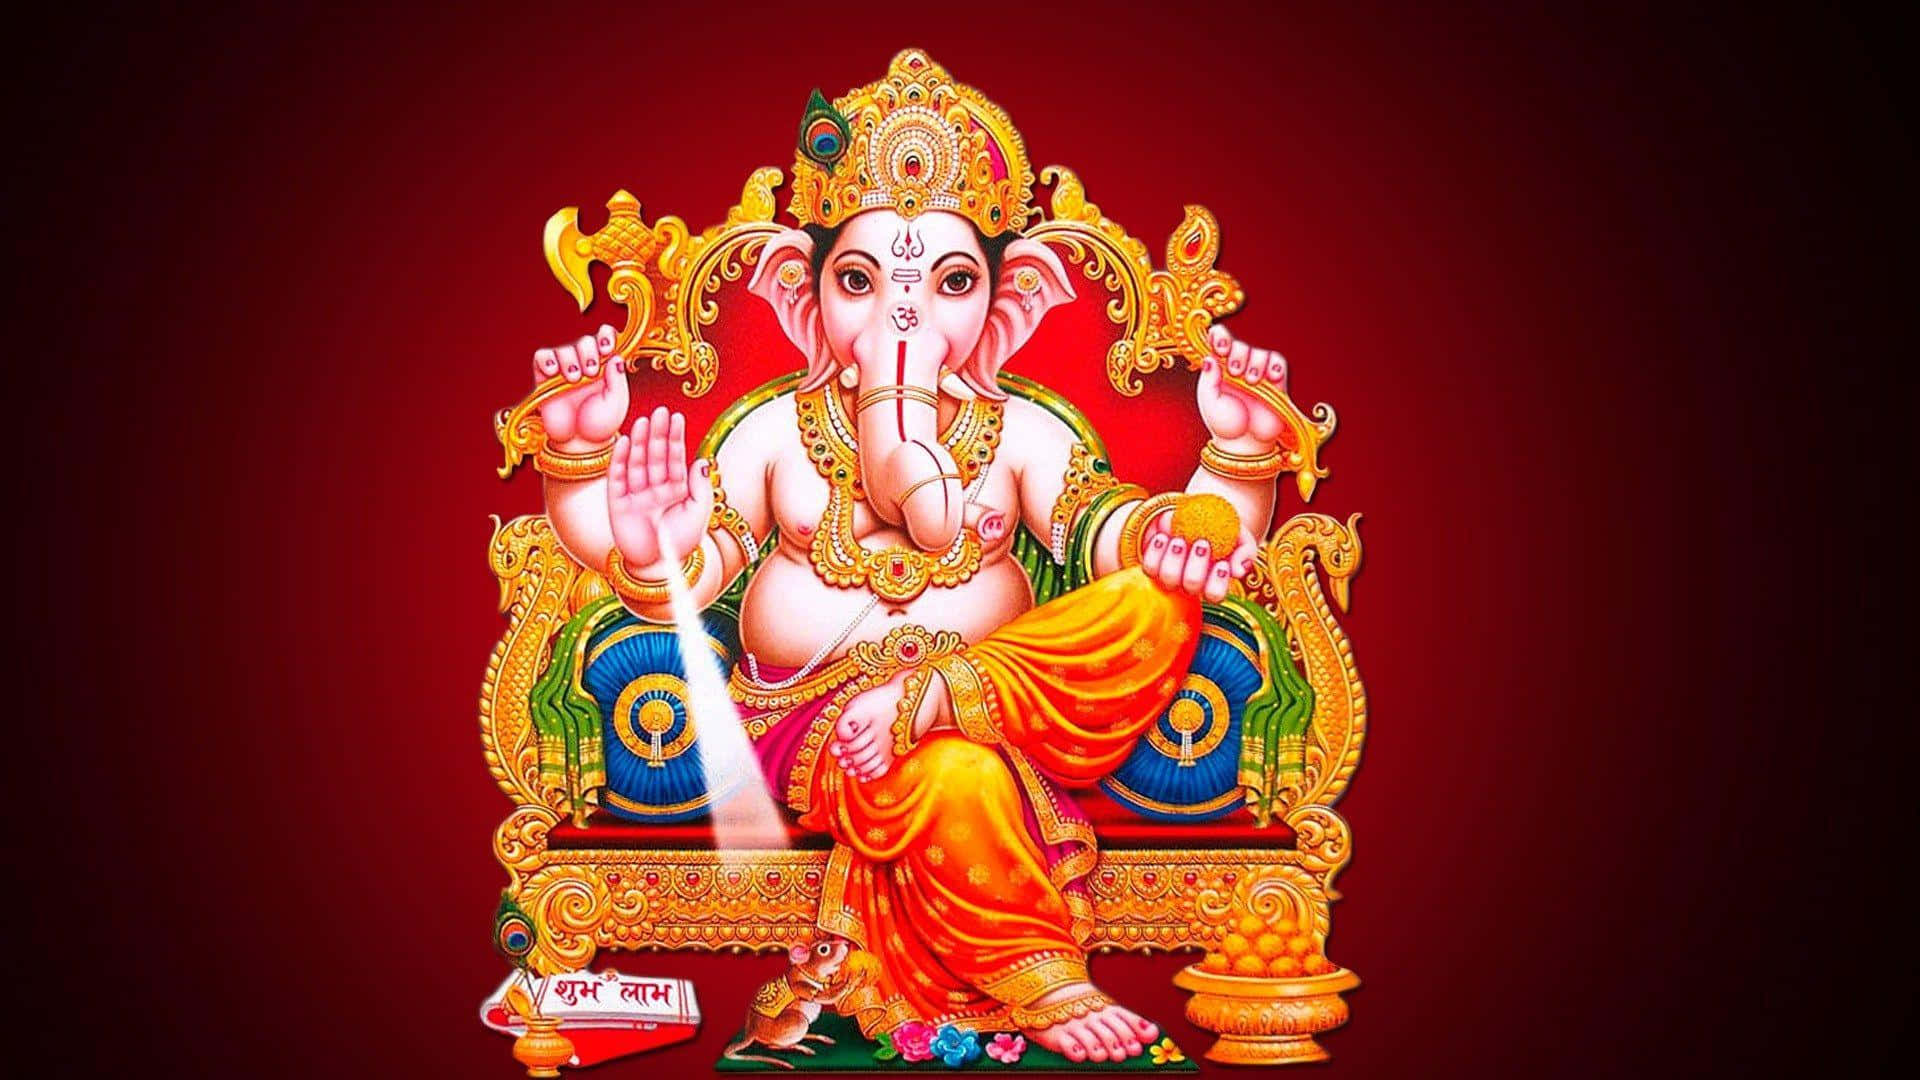 Divine Ganesh: Remover of Obstacles